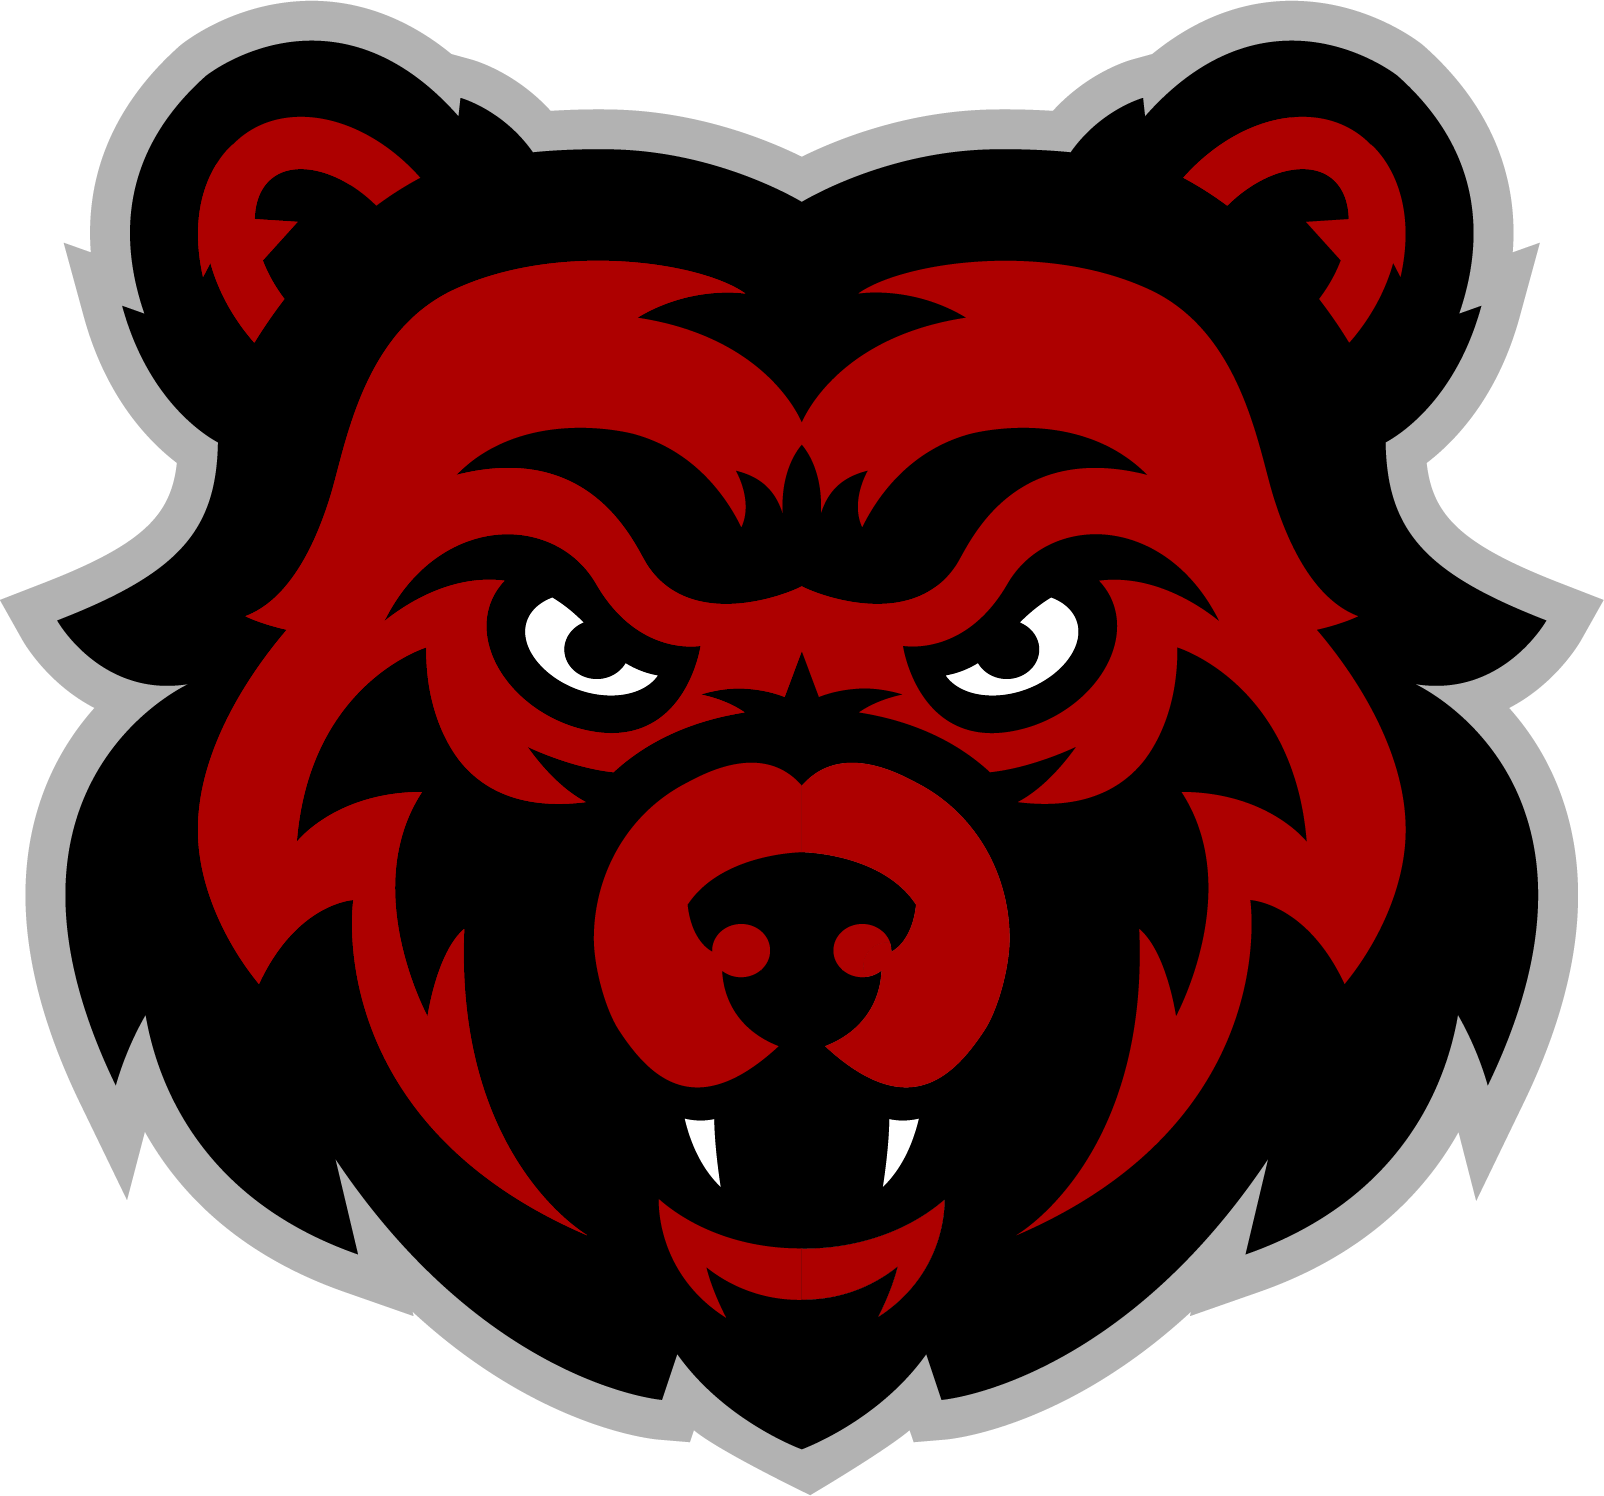 Red and Black Bear Logo - Branding Guide Park City Elementary County School District